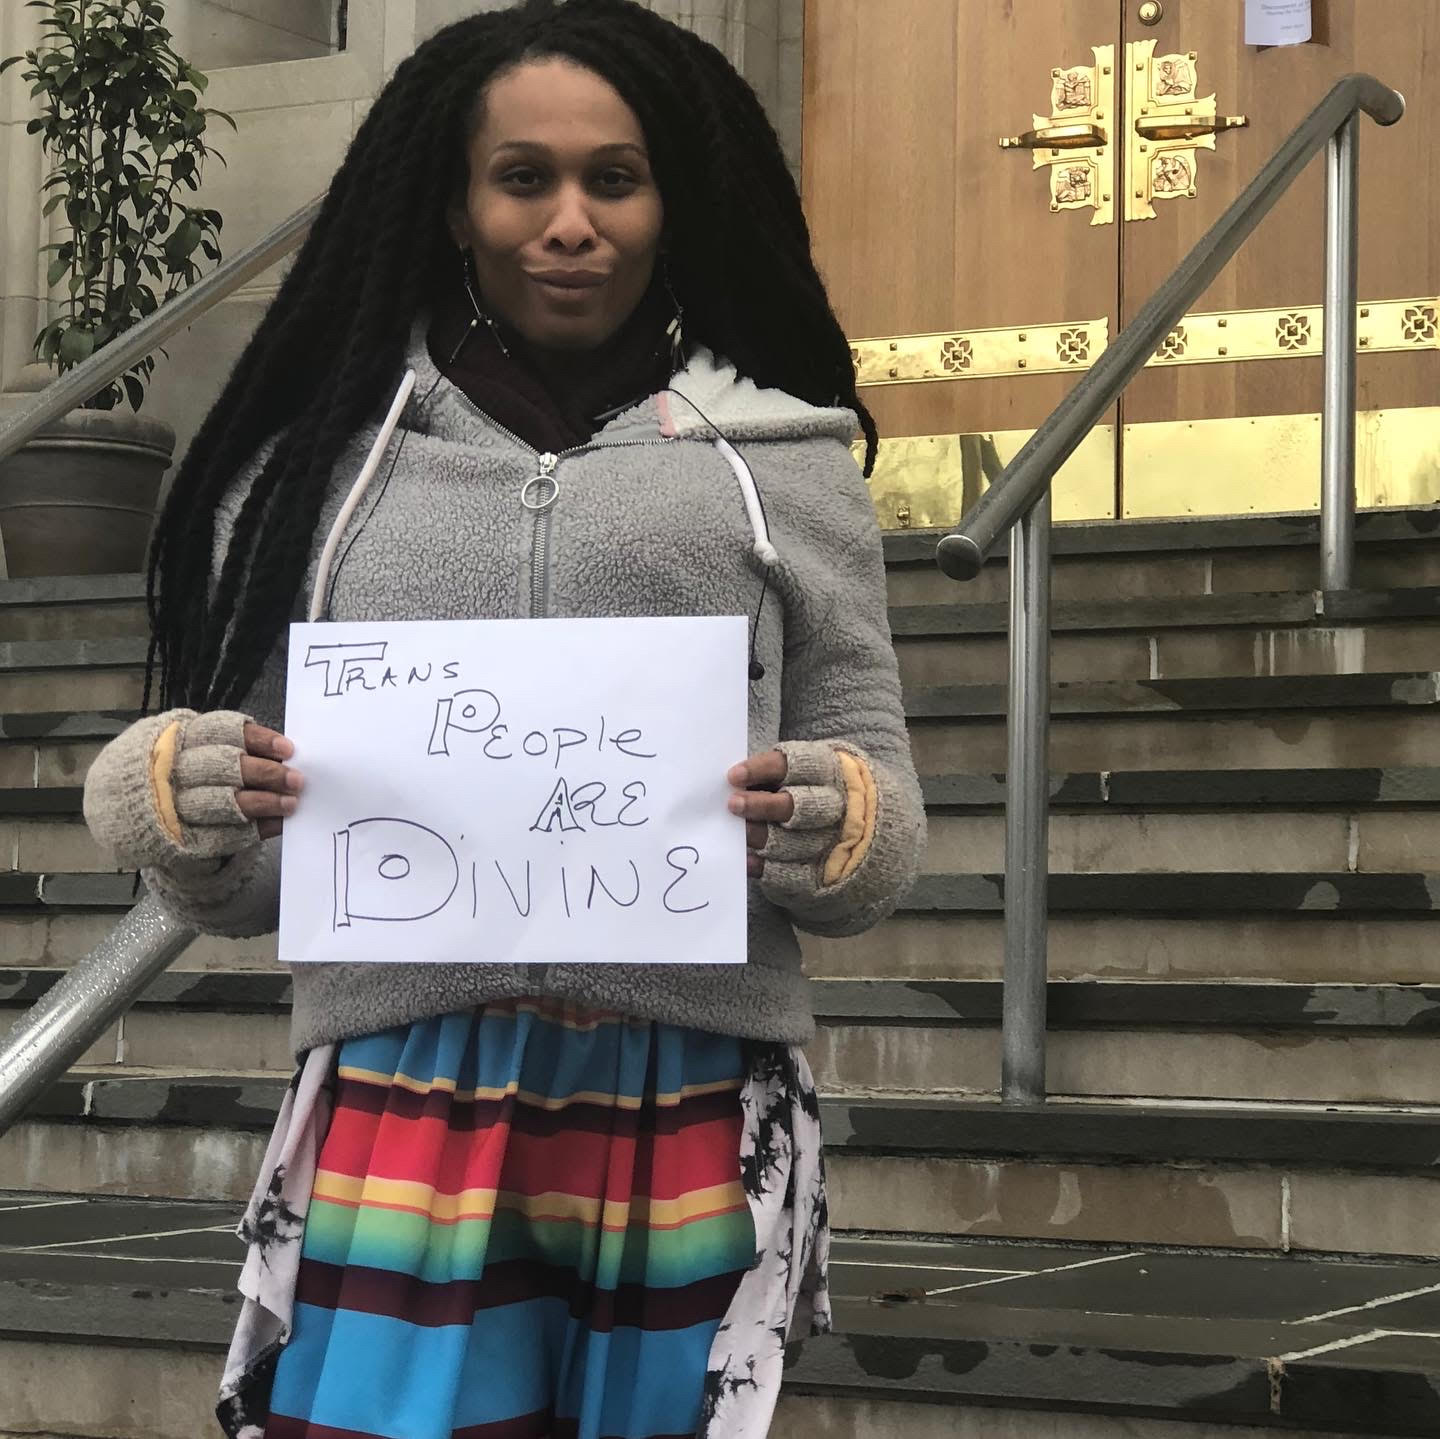 Brown skinned Black Trans Woman in front of a church holding a sign that reads Trans People are Divine and wearing a multicolored striped skirt with grey sweatshirt.